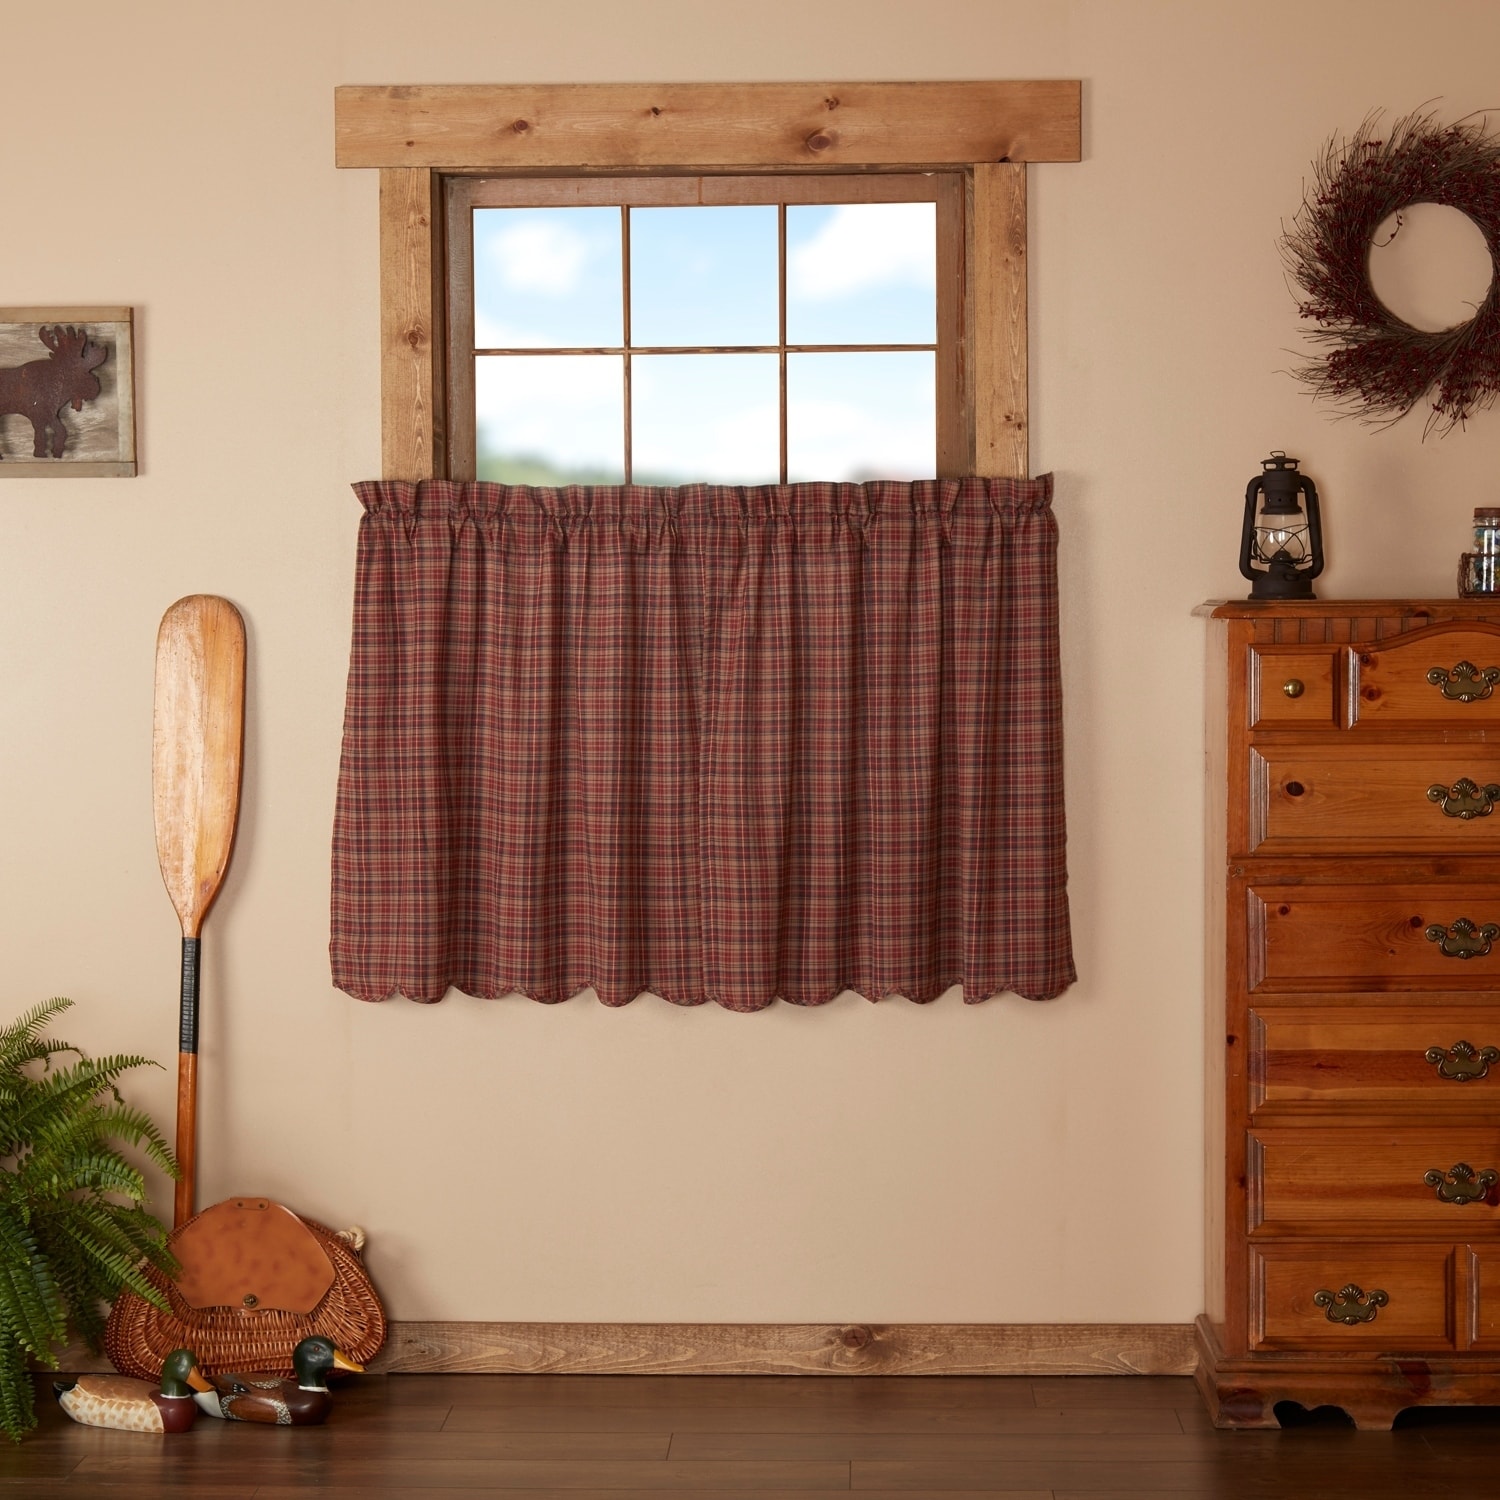 Red Rustic Kitchen Curtains Vhc Parker Tier Pair Rod Pocket Cotton Plaid Overstock 17926358 24x36